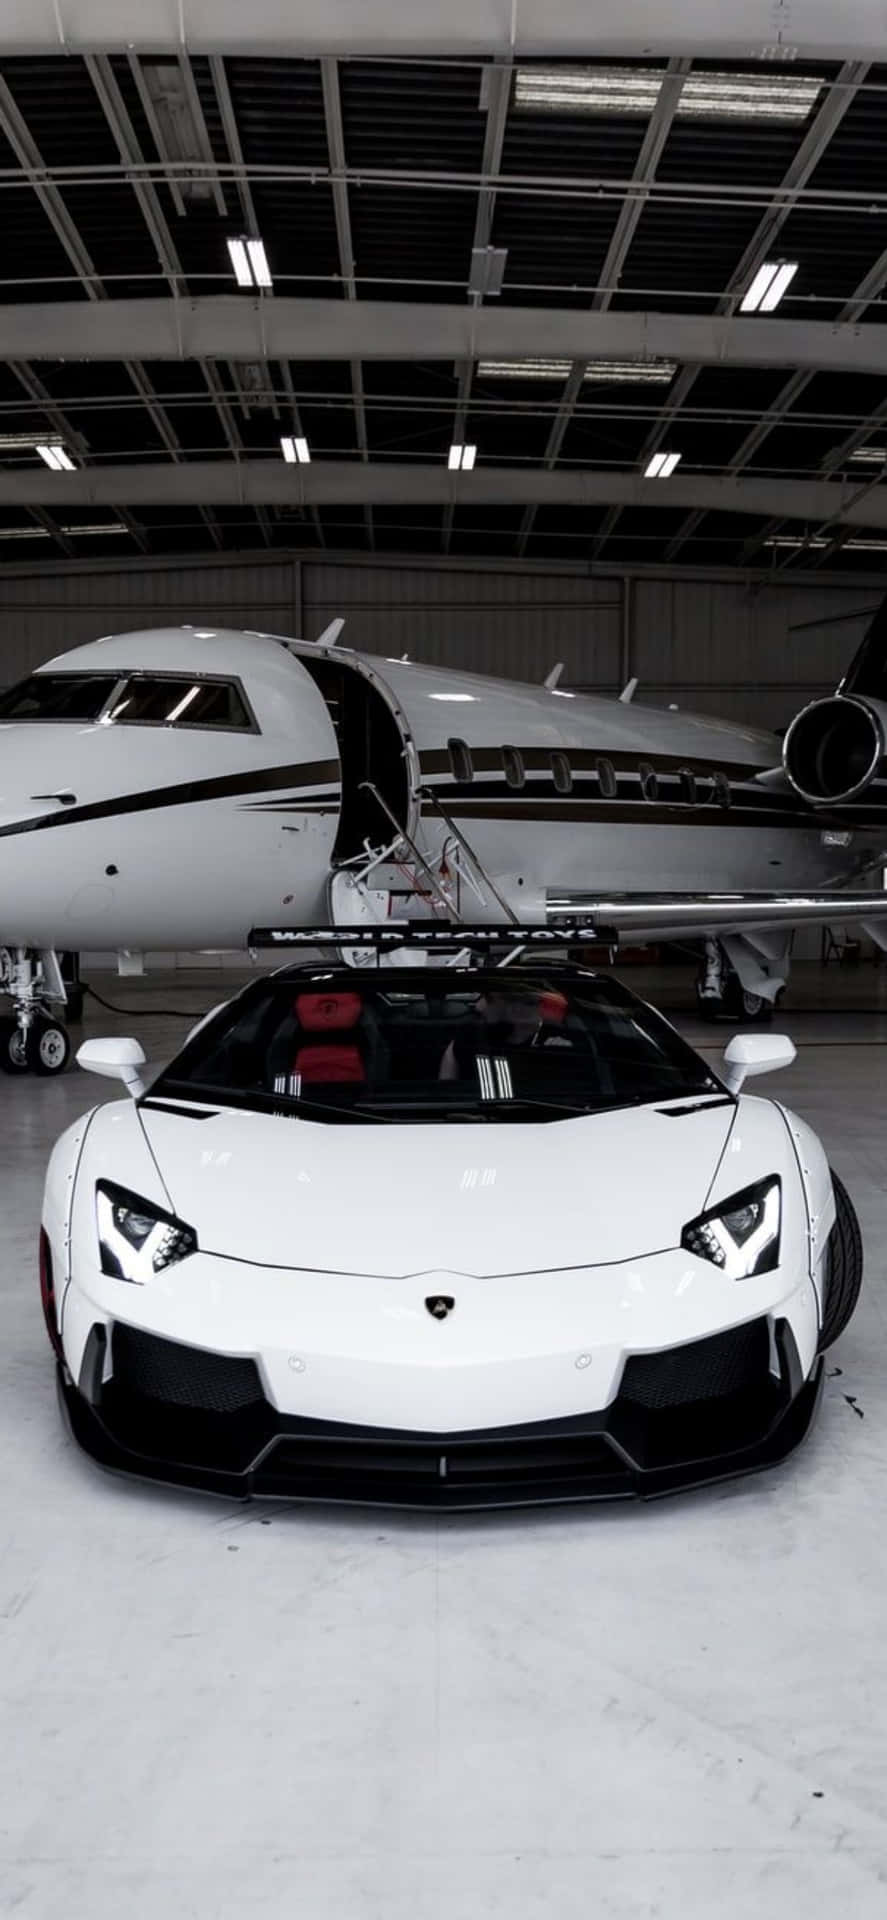 A White Car Parked In Front Of A Jet